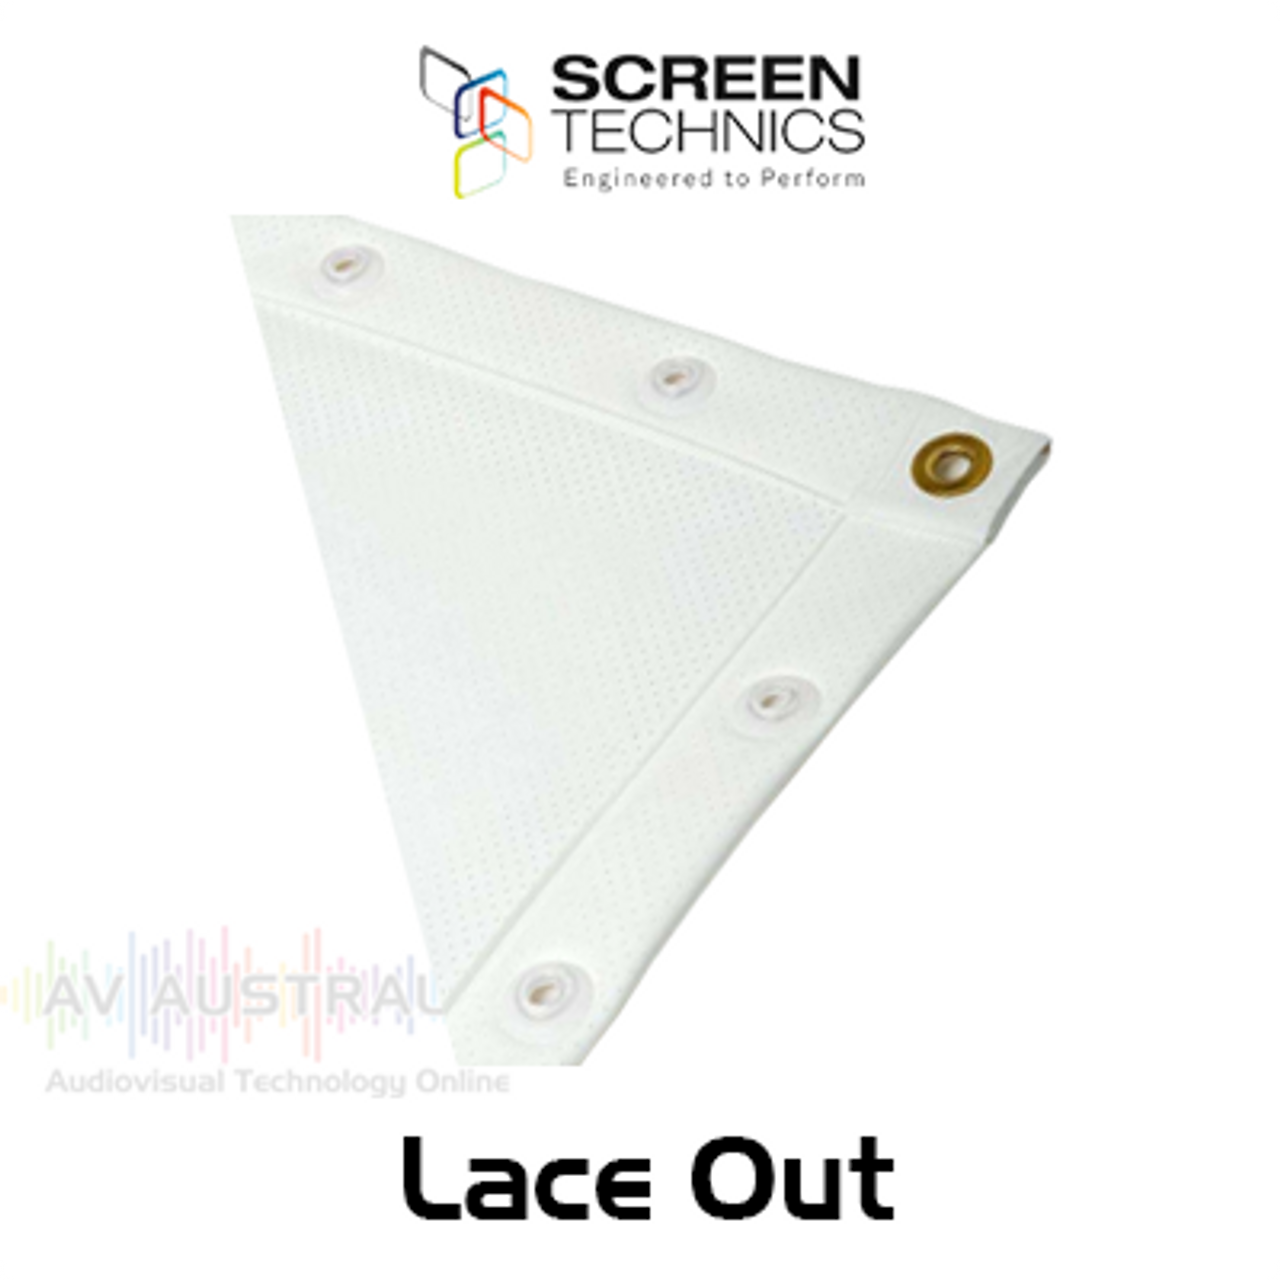 ST Lace Out Welded PVC Projection Screens